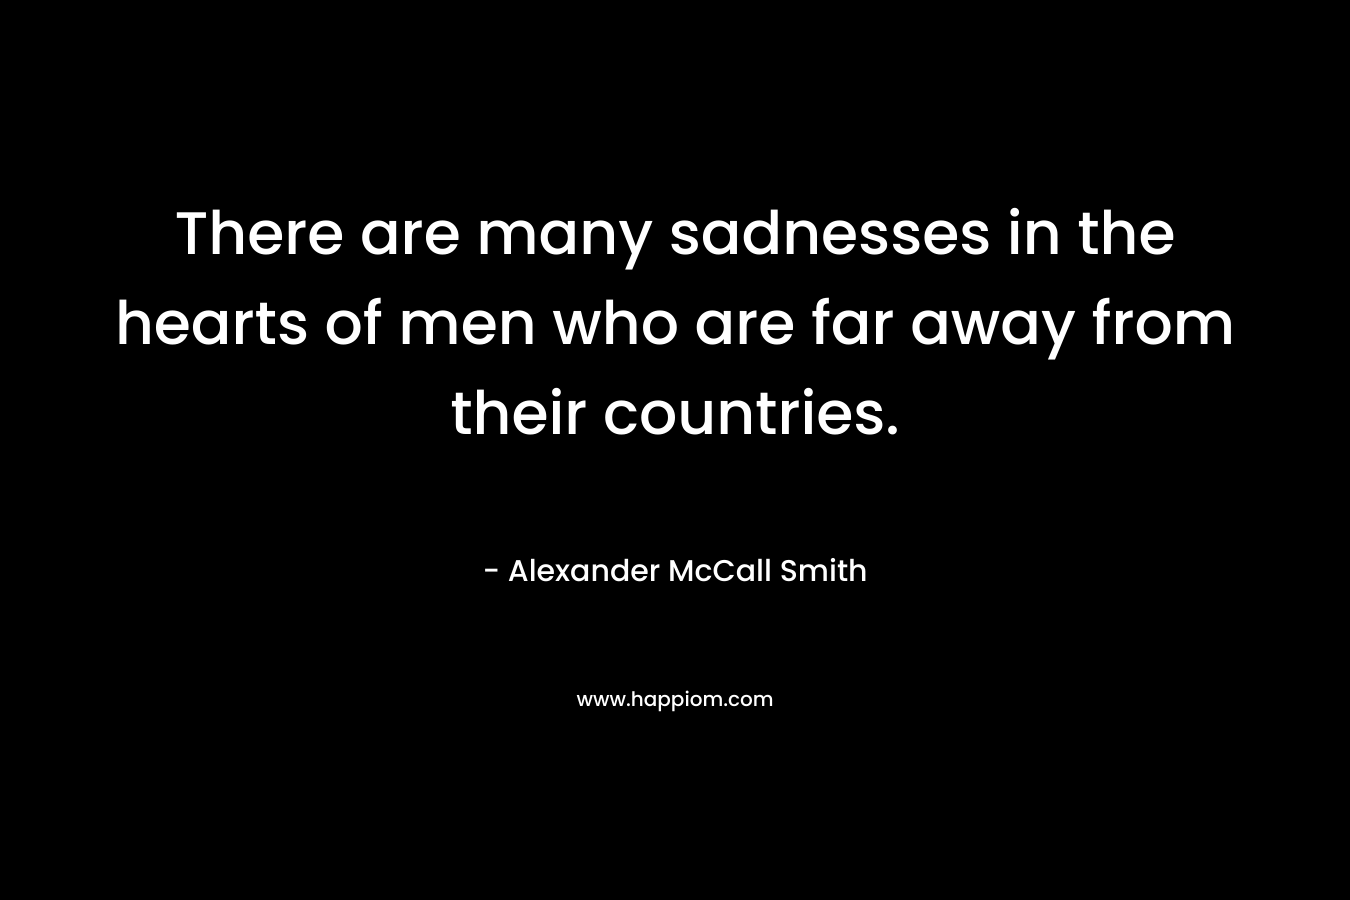 There are many sadnesses in the hearts of men who are far away from their countries.